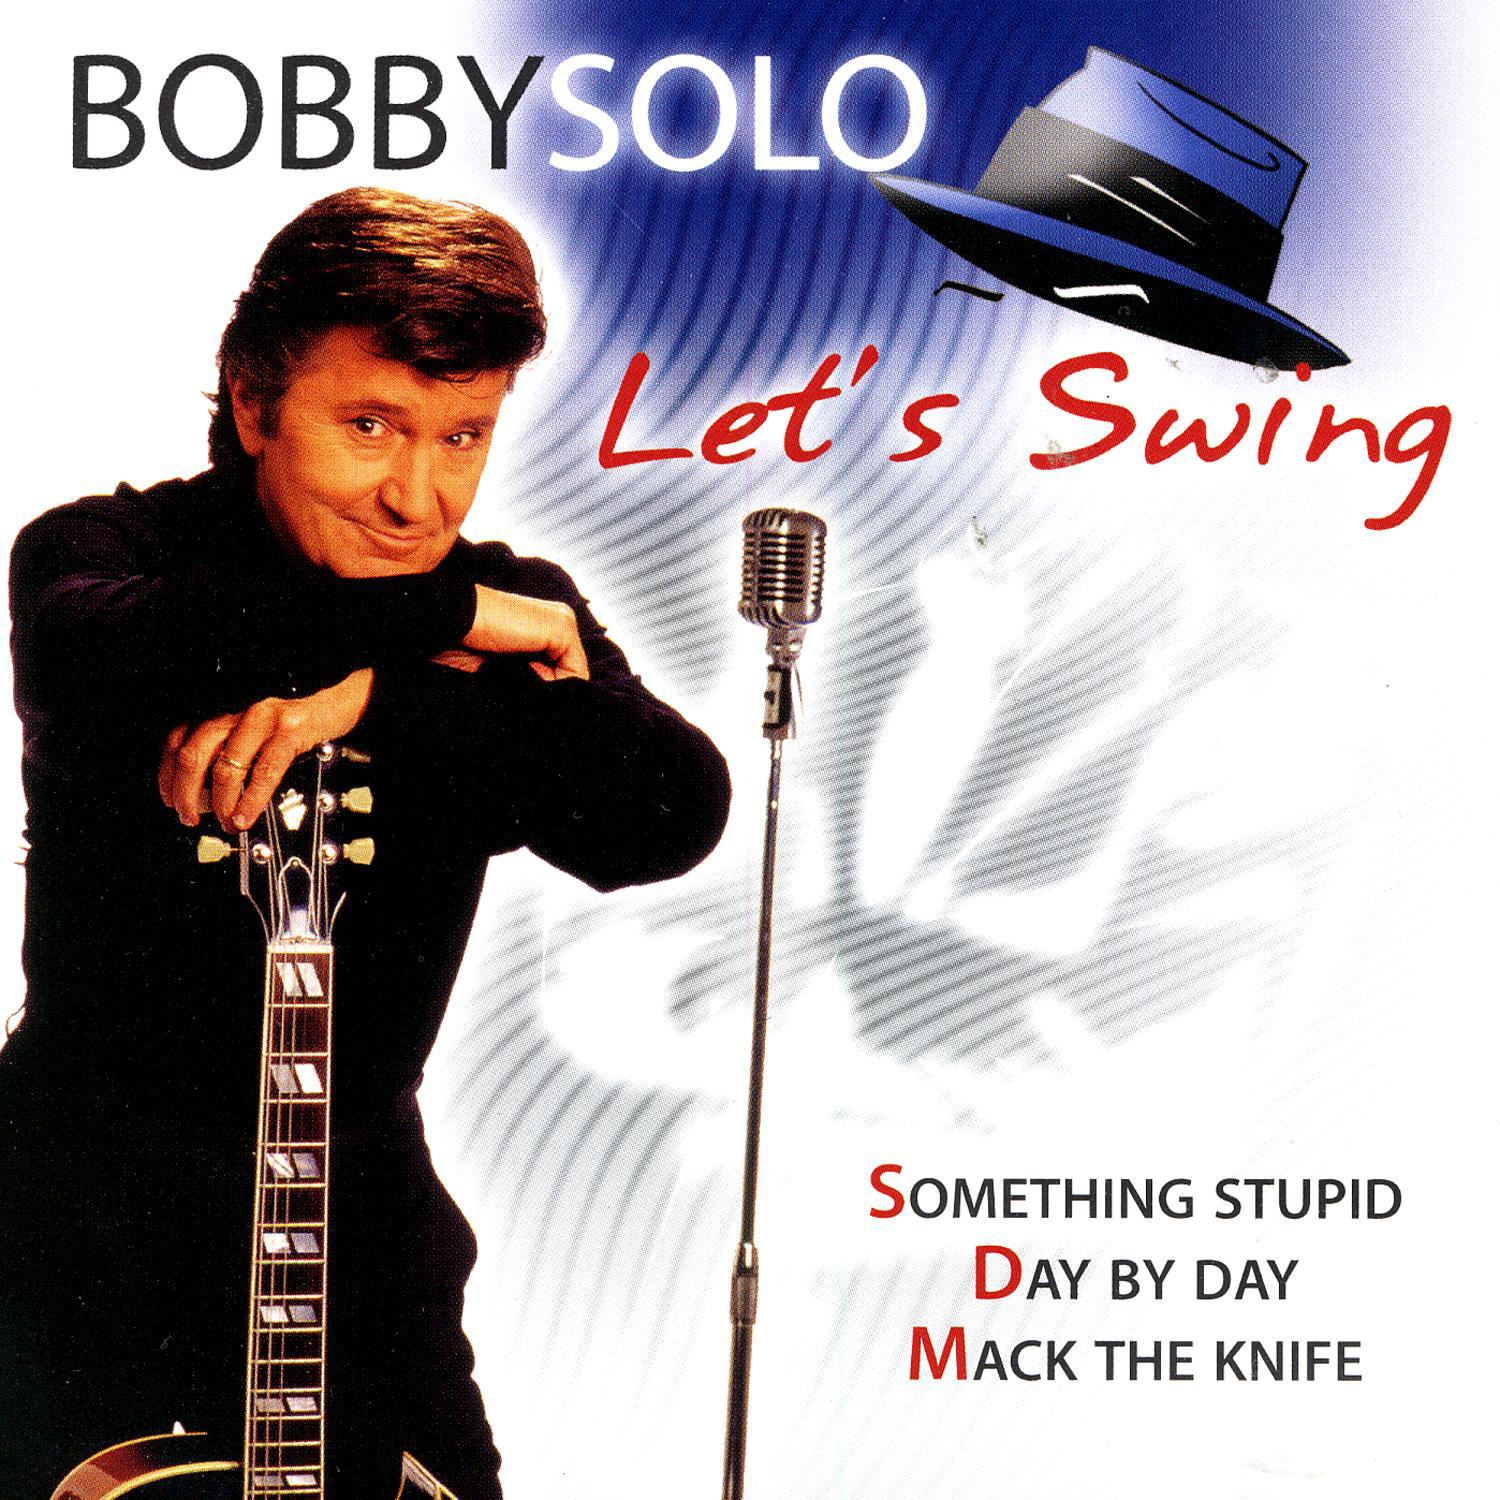 BOBBY SOLO - LETS SWING